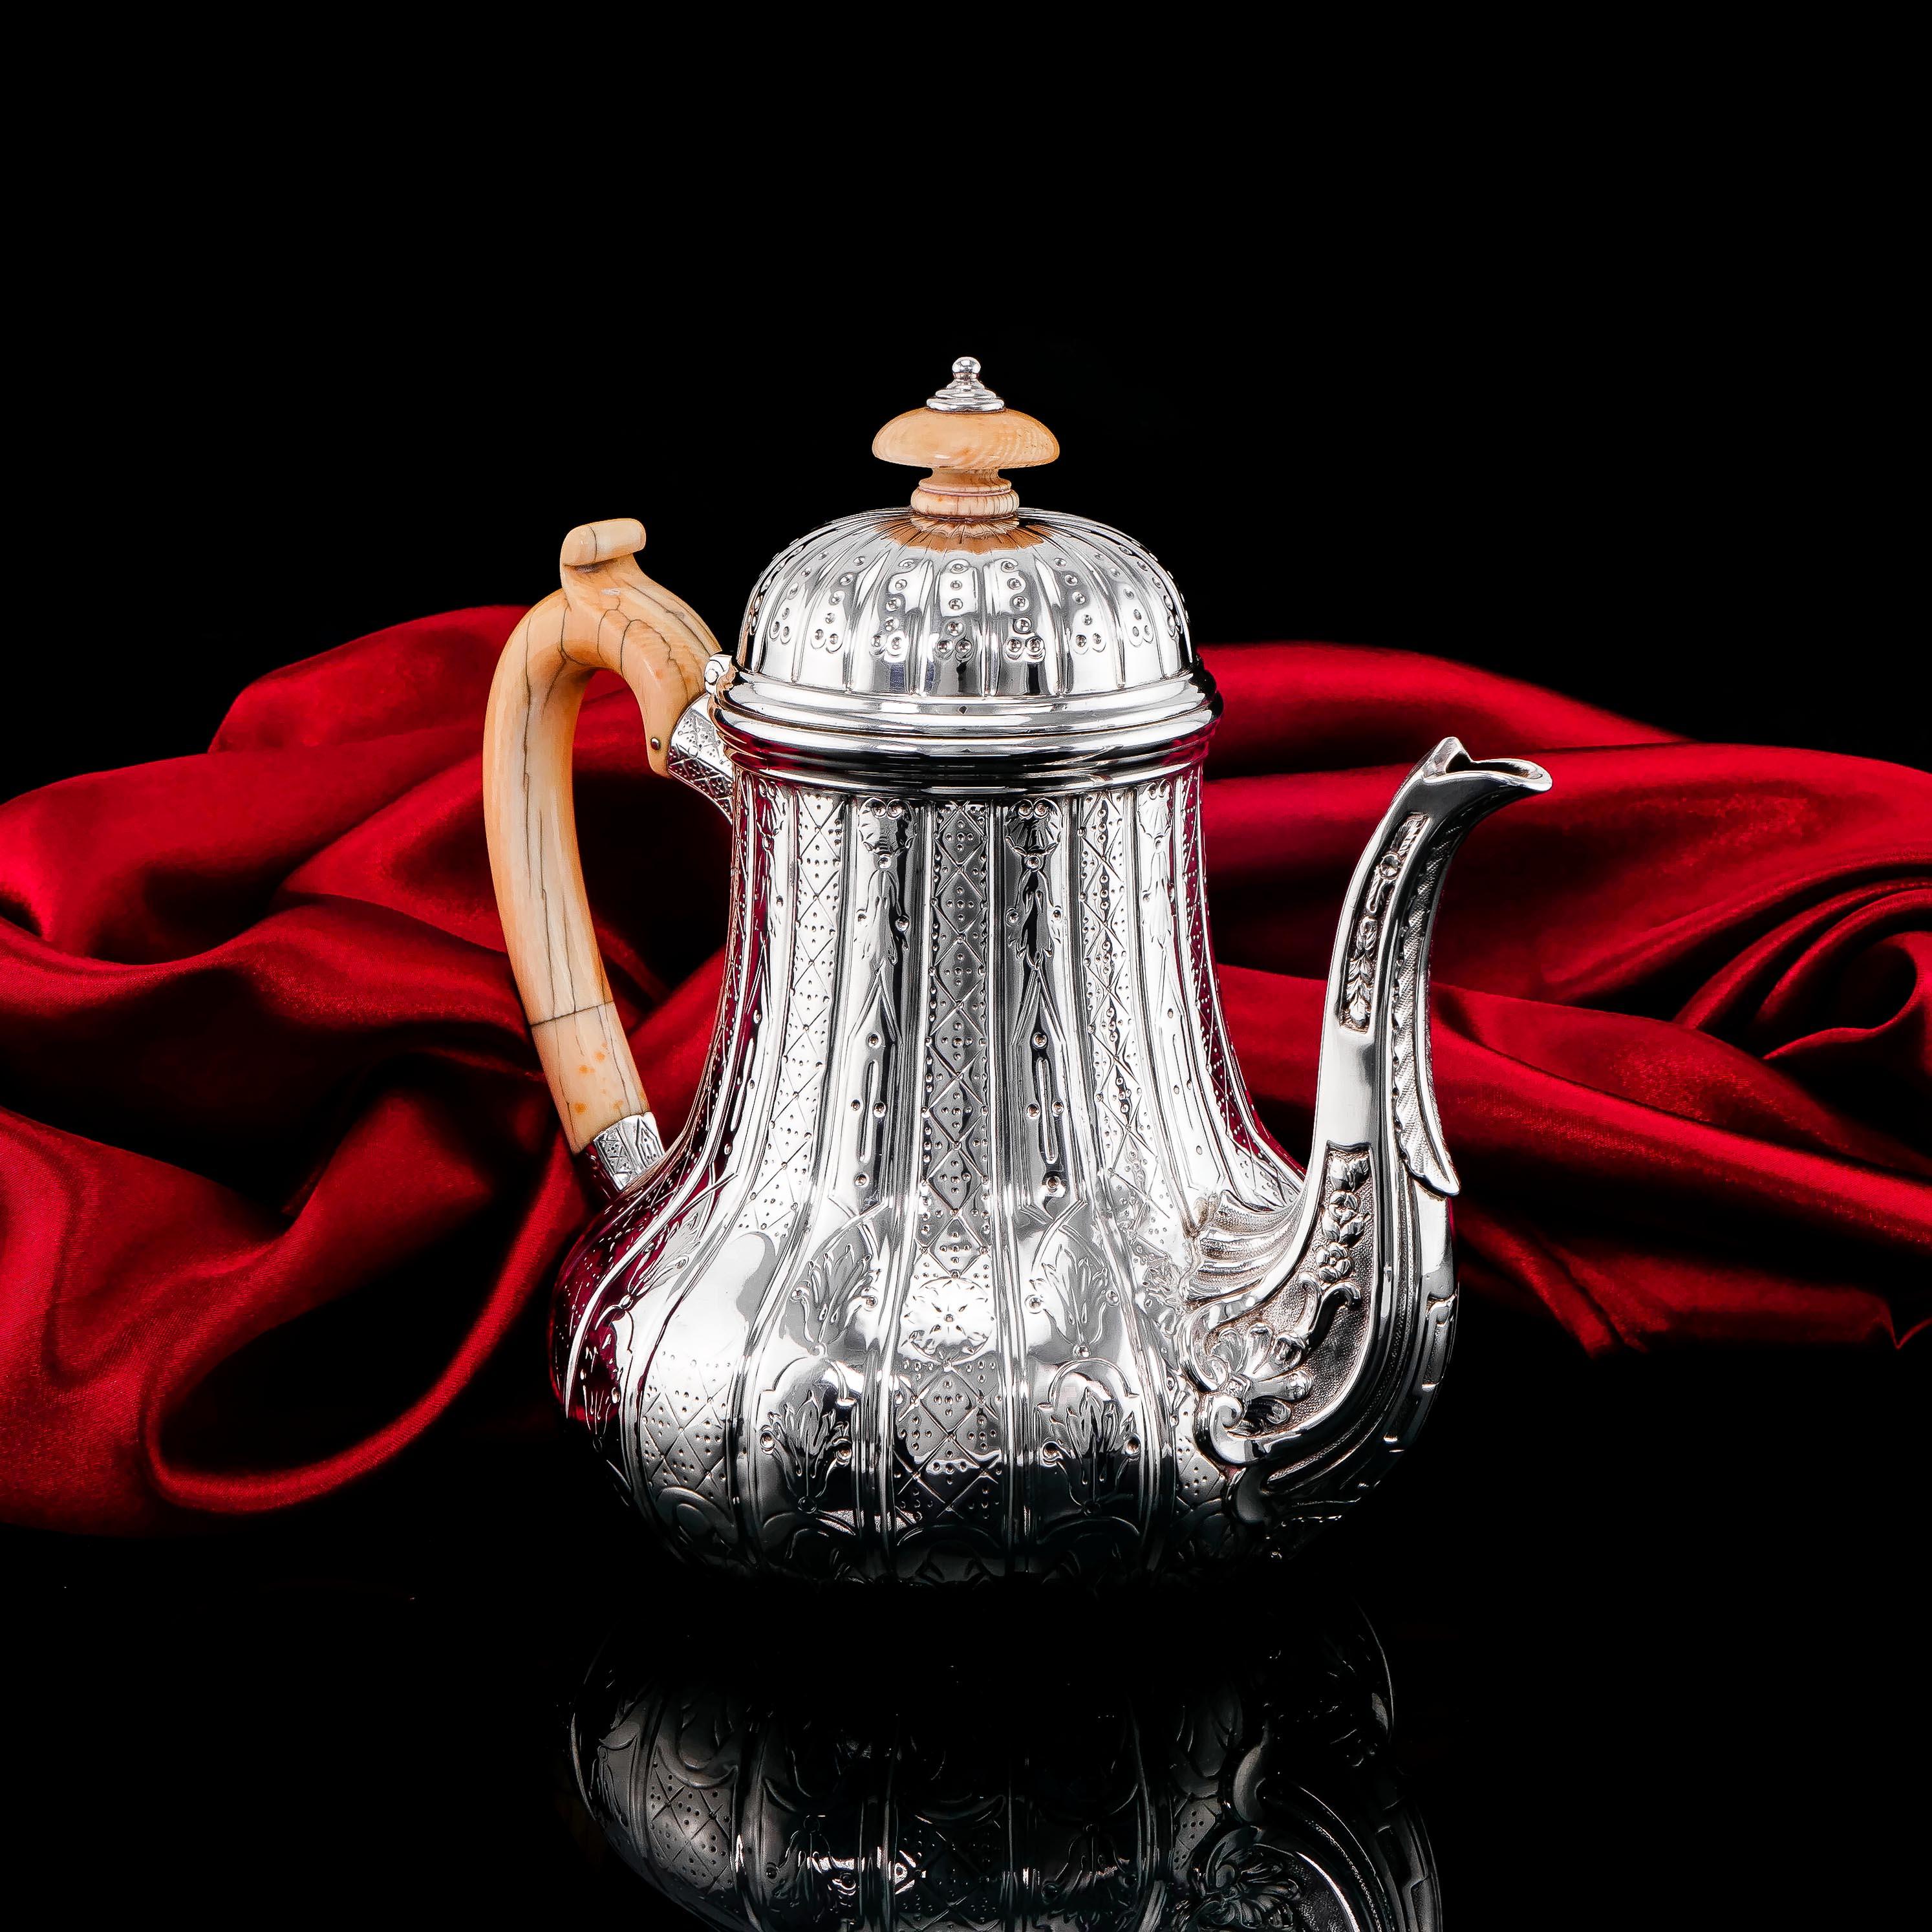 We are delighted to offer this elegant antique solid silver Victorian coffee pot made in London in 1866 with the marks of Robert Garrard. 
 
Garrard (founded in 1735), still producing fine silverware and jewellery today, throughout history has been